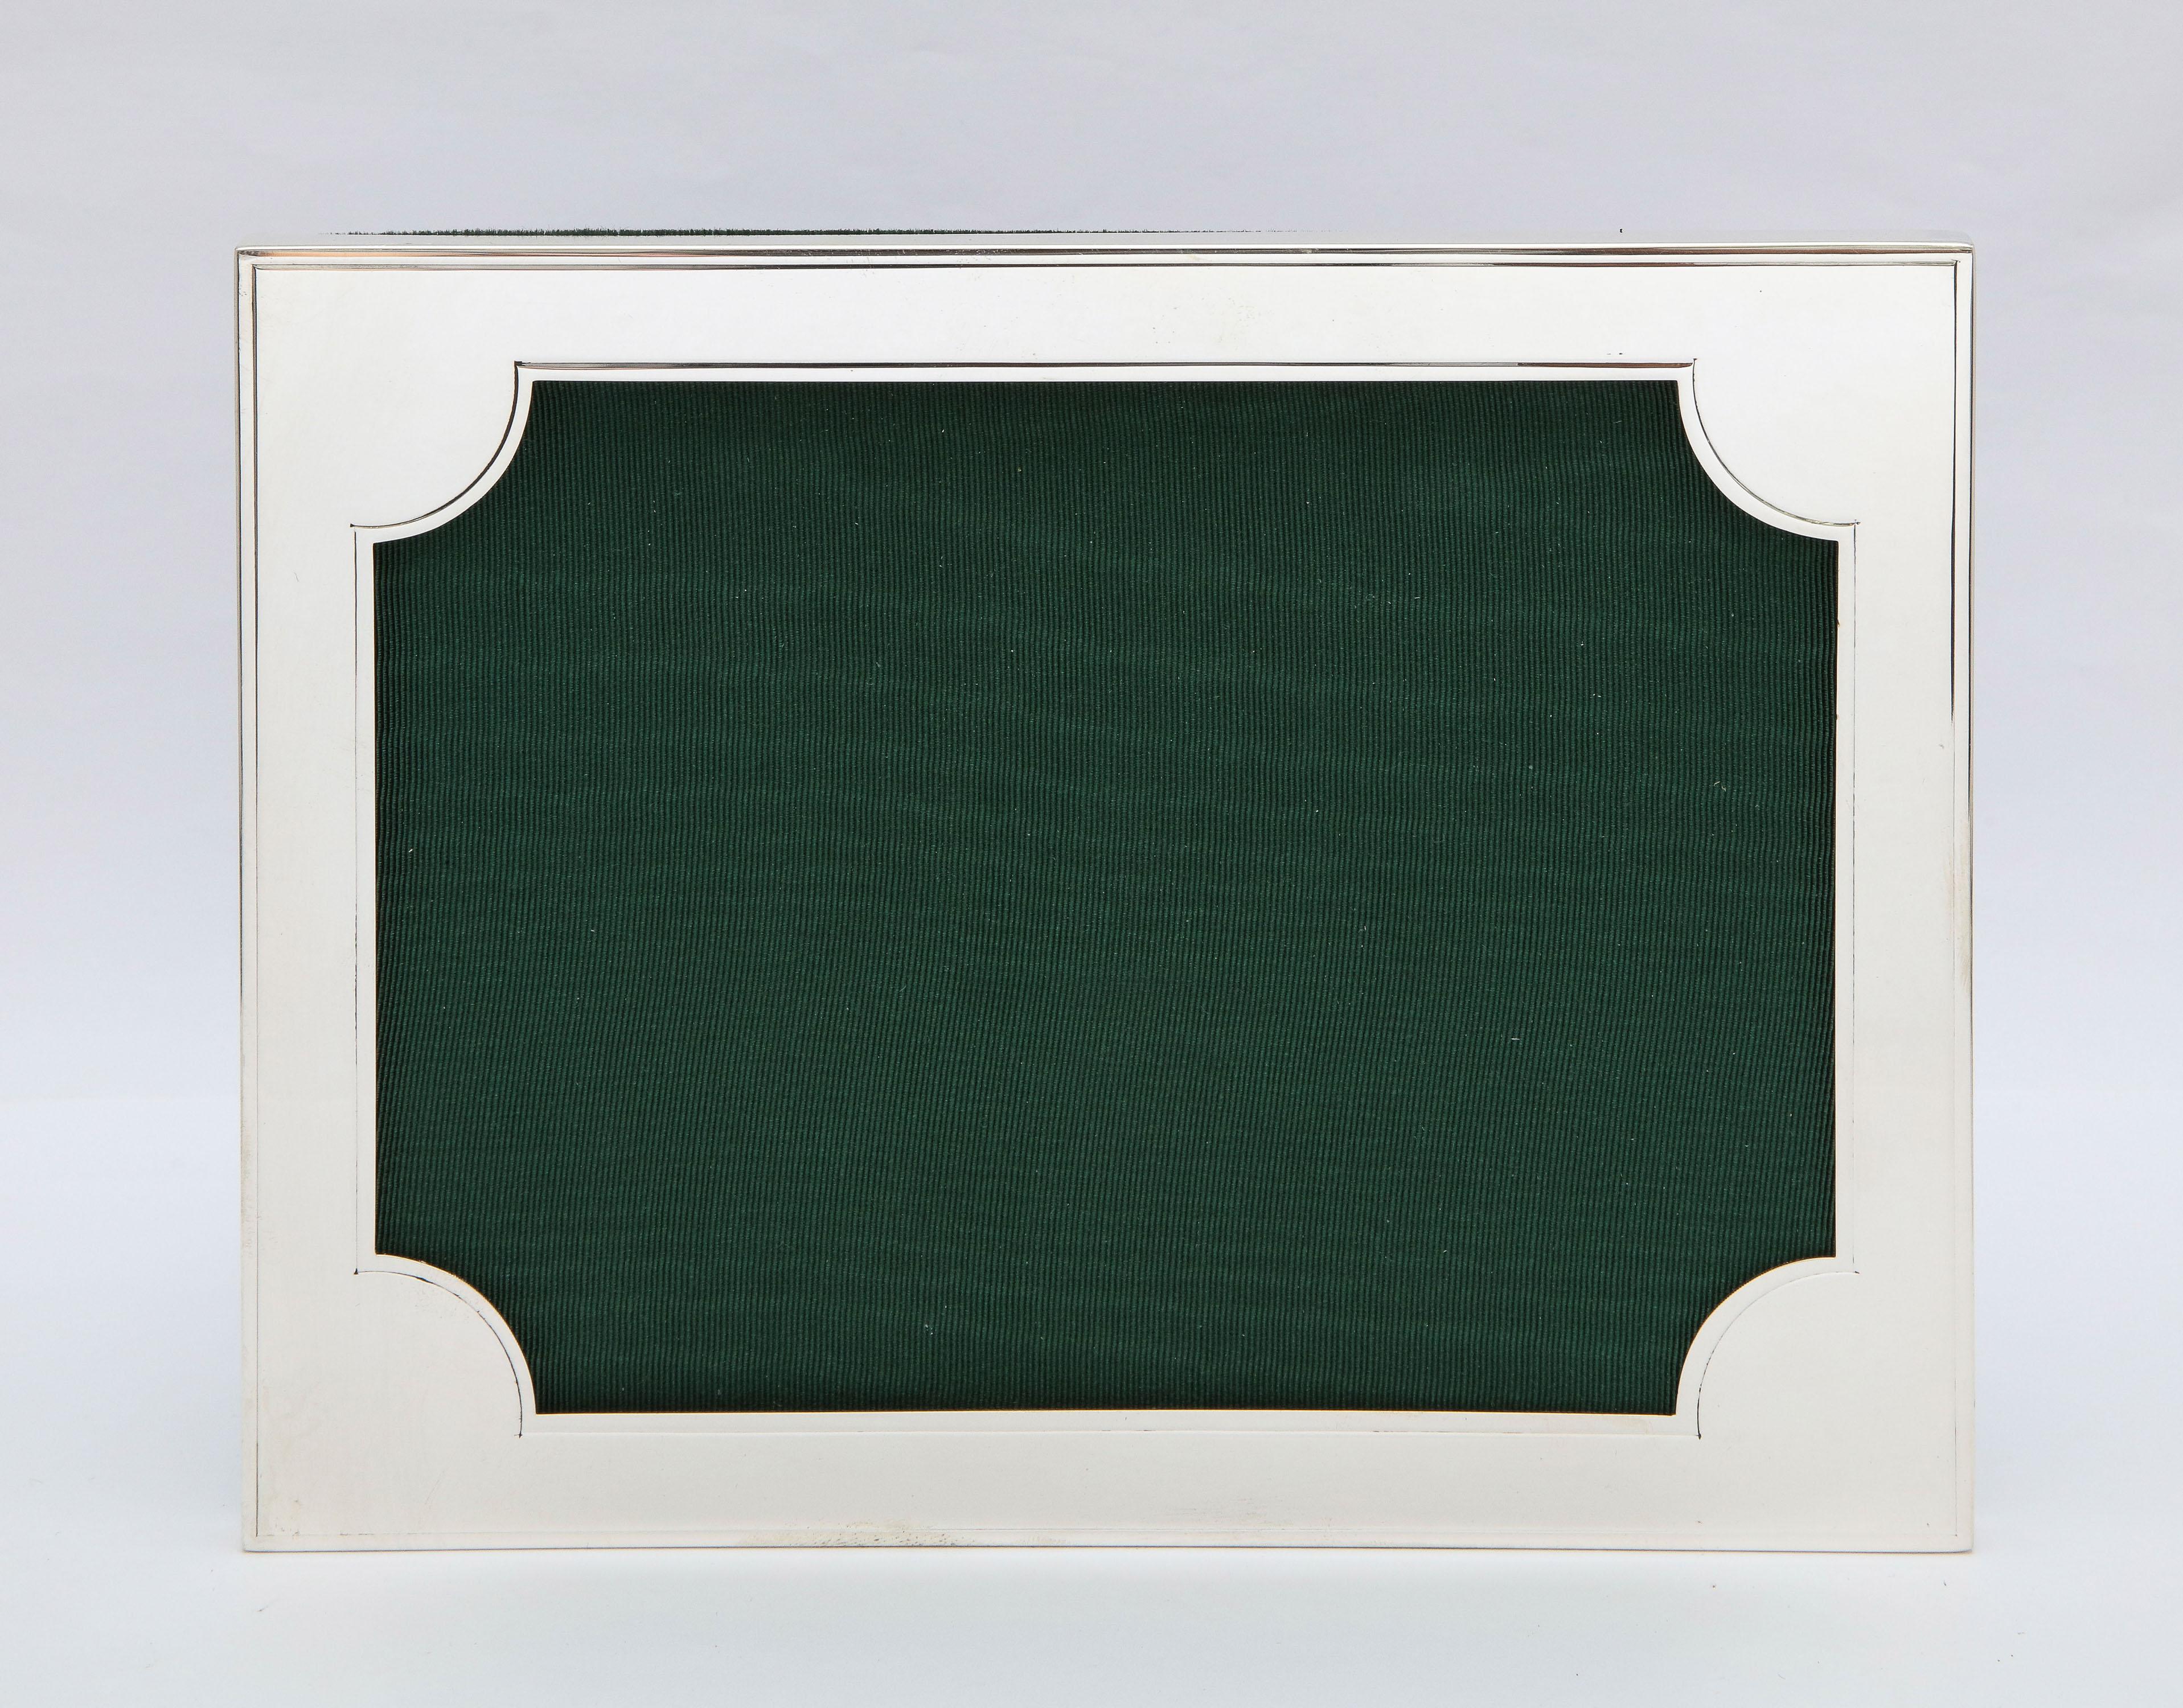 Art Deco, sterling silver picture frame, New York, circa 1930s, Cartier- maker. Measures 8 1/2 inches high x 6 1/4 inches wide x 4 3/4 inches deep when easel is in open position. Stands both horizontally and vertically. Will show a photo that is 5